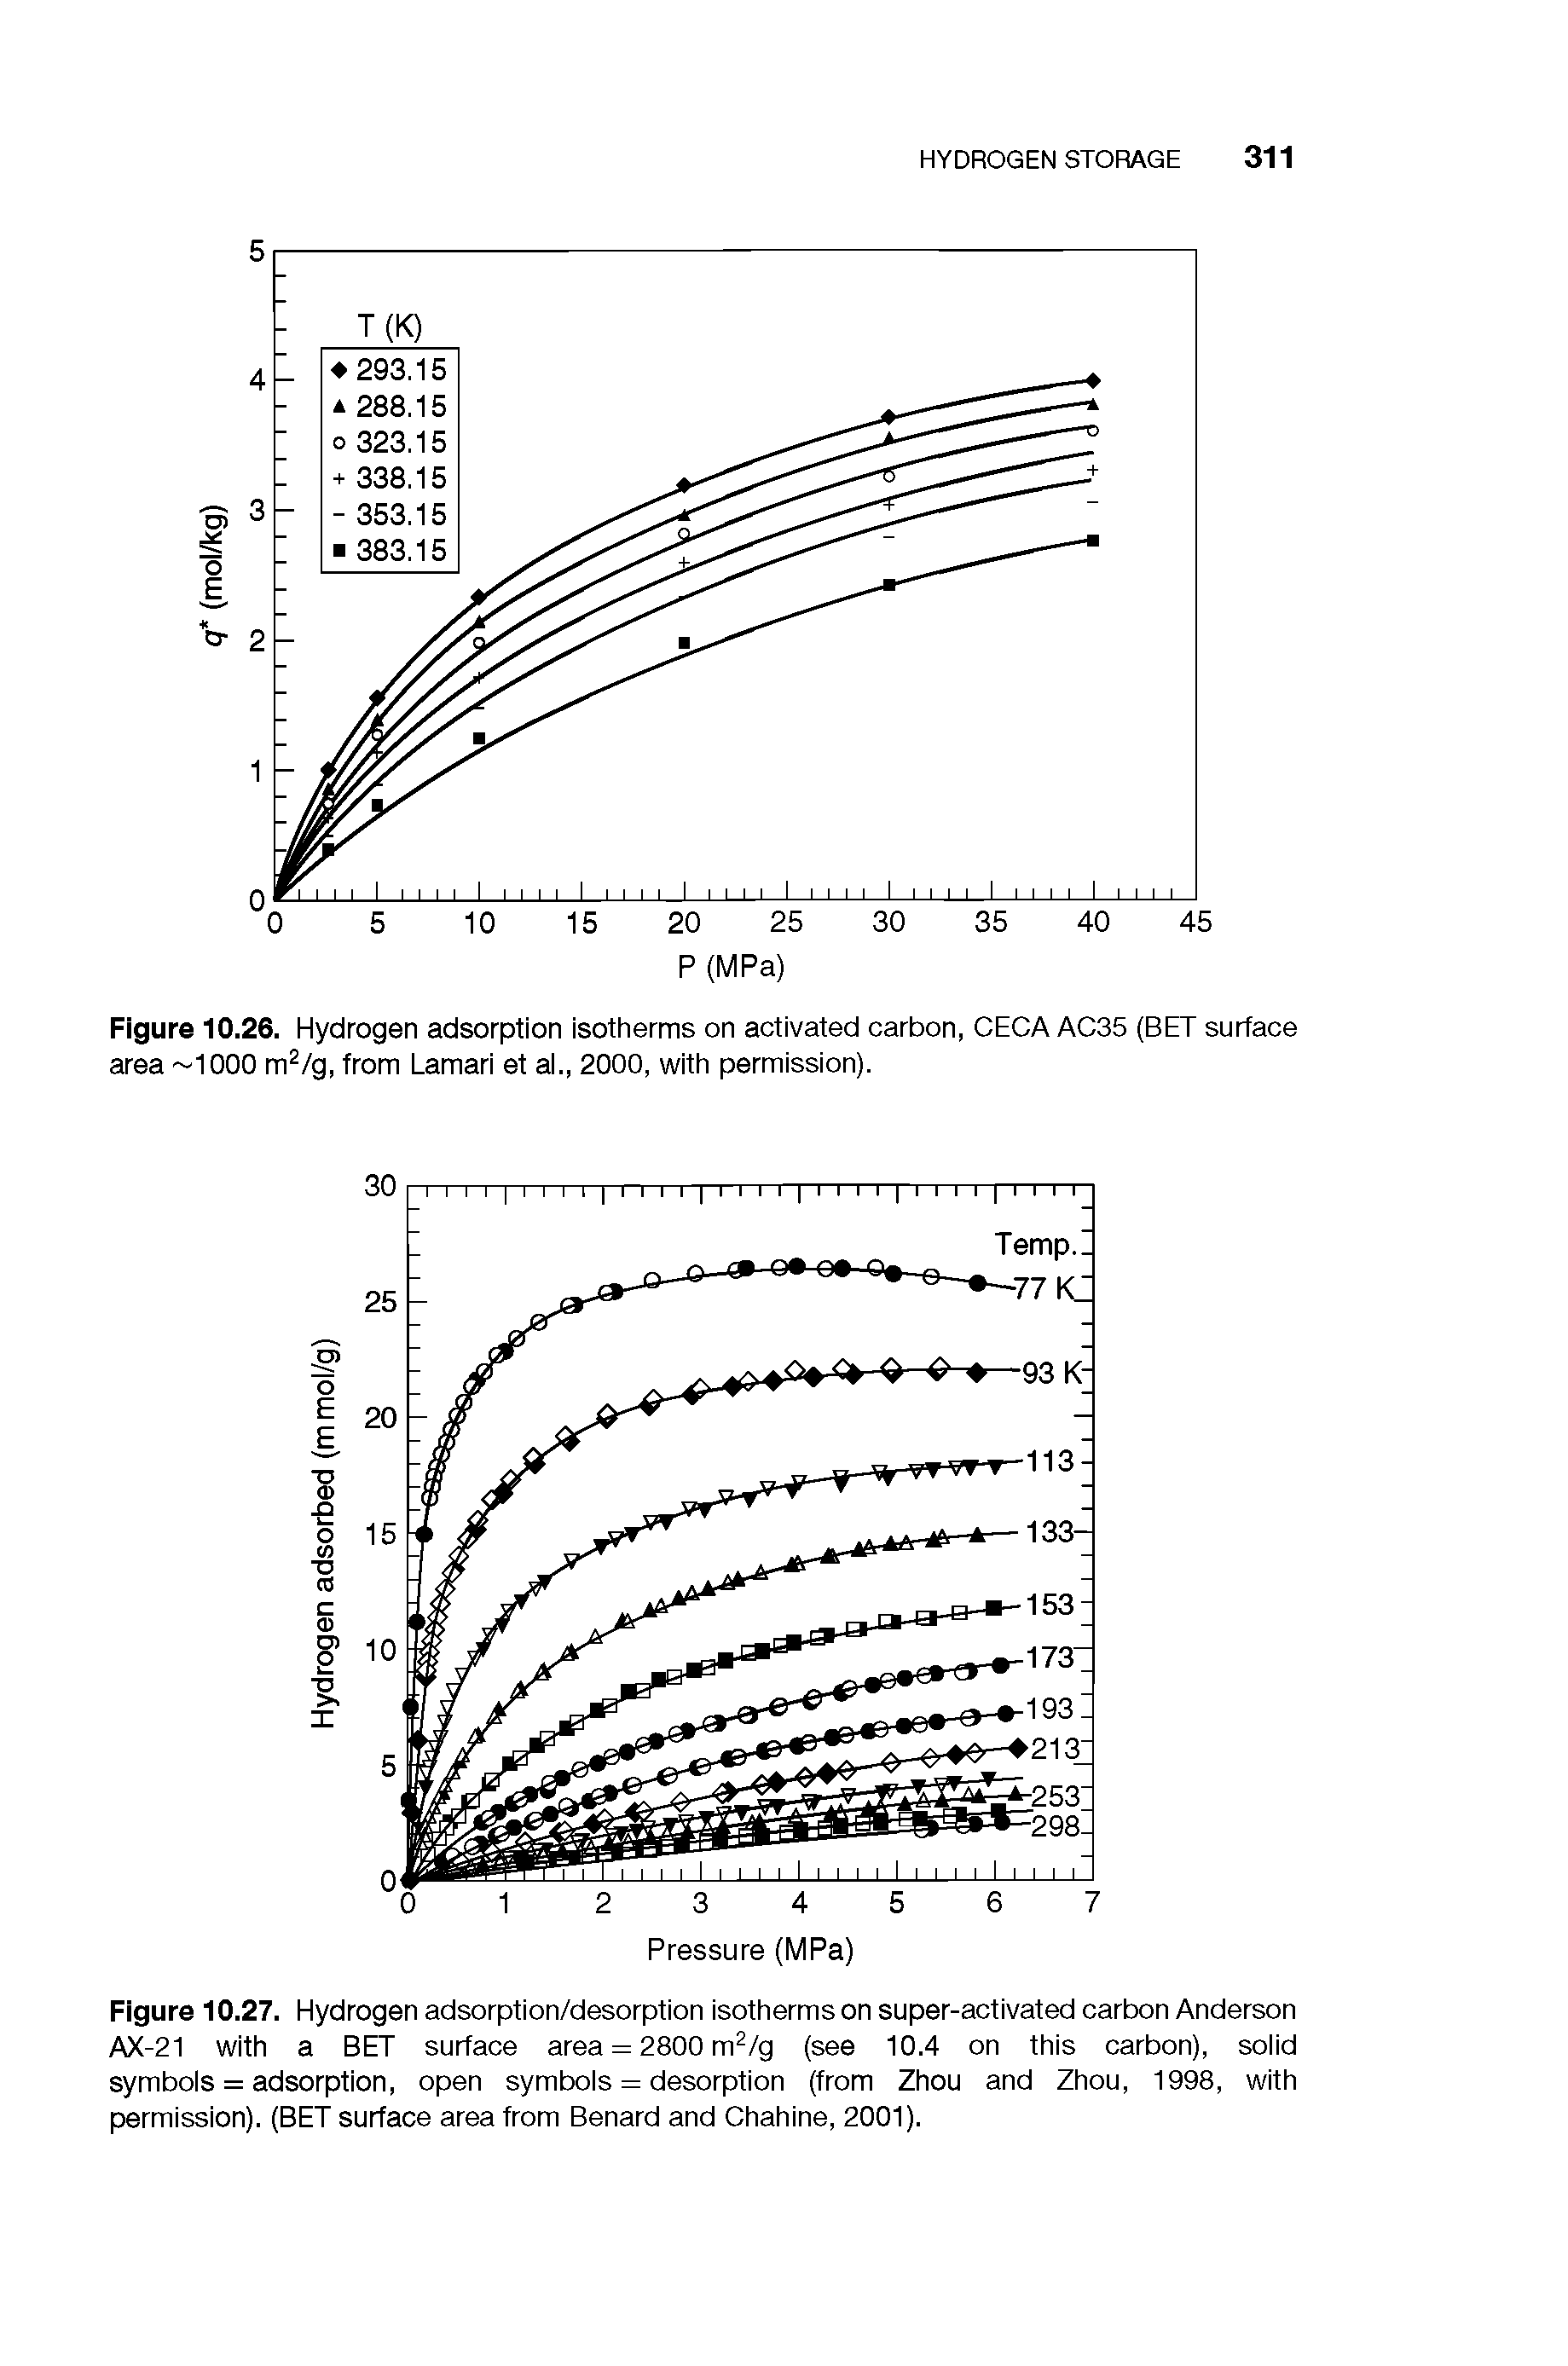 Figure 10.26. Hydrogen adsorption isotherms on activated carbon, CECA AC35 (BET surface area 1000 m /g, from Lamari et ai., 2000, with permission).